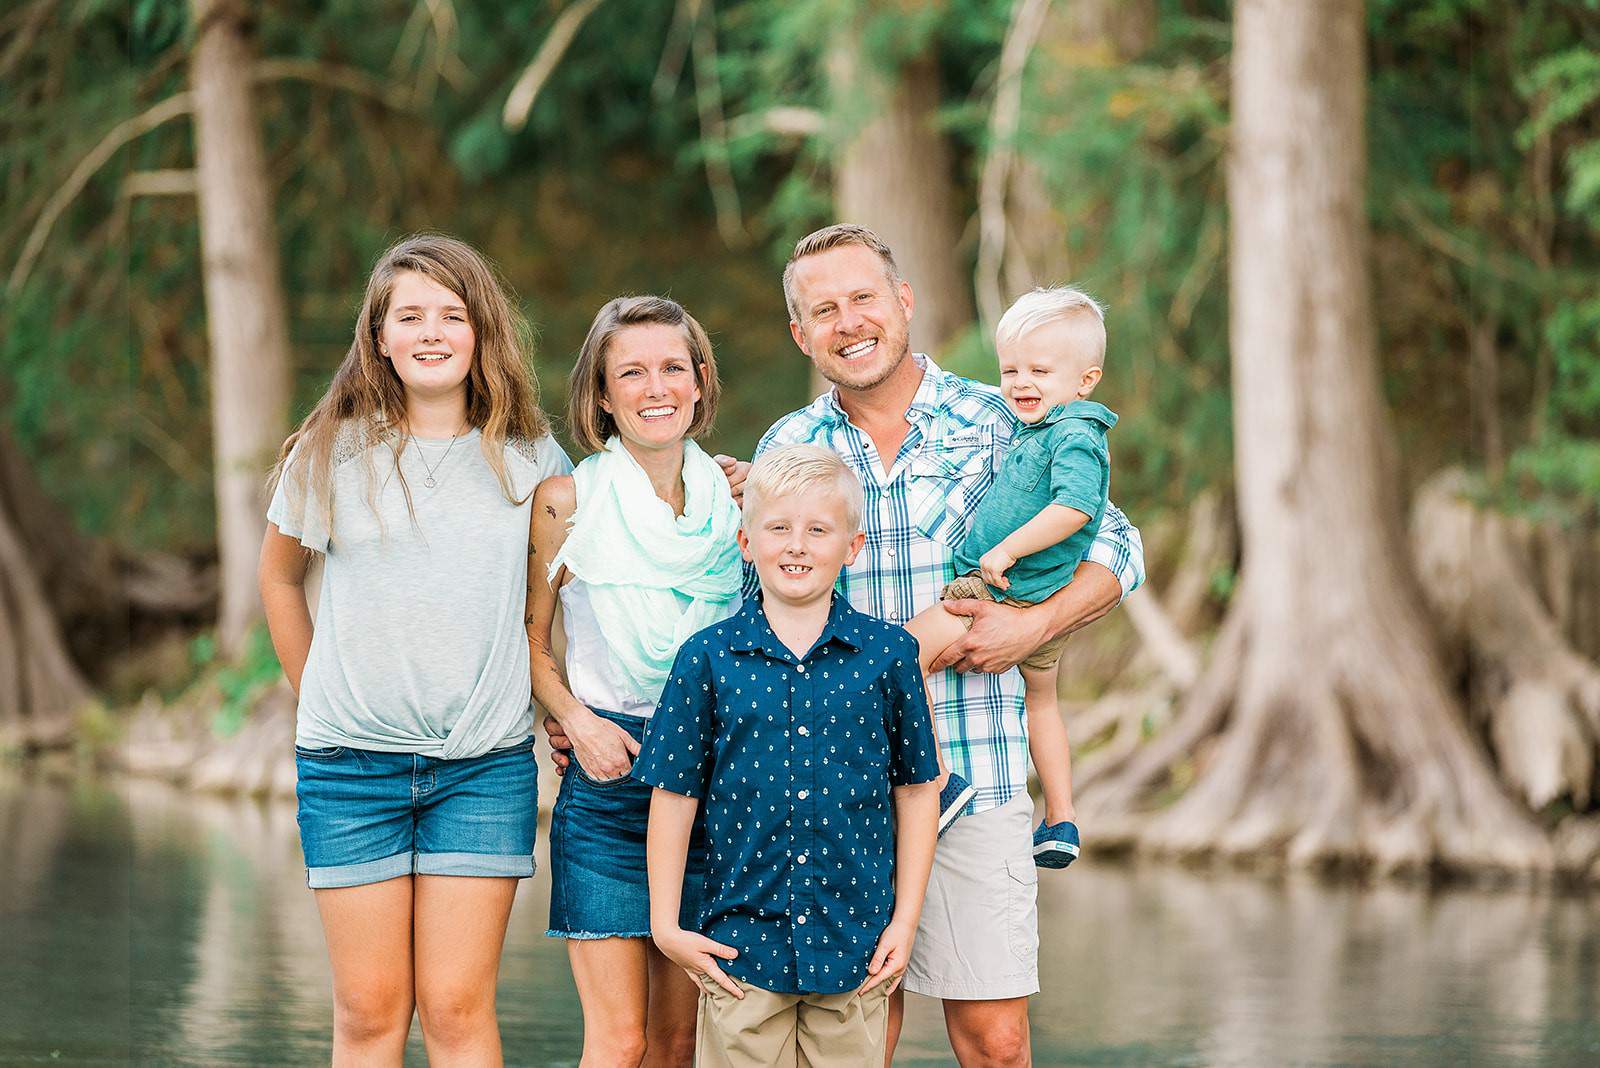 Zach Zeller, co-founder of Script Co and his family.